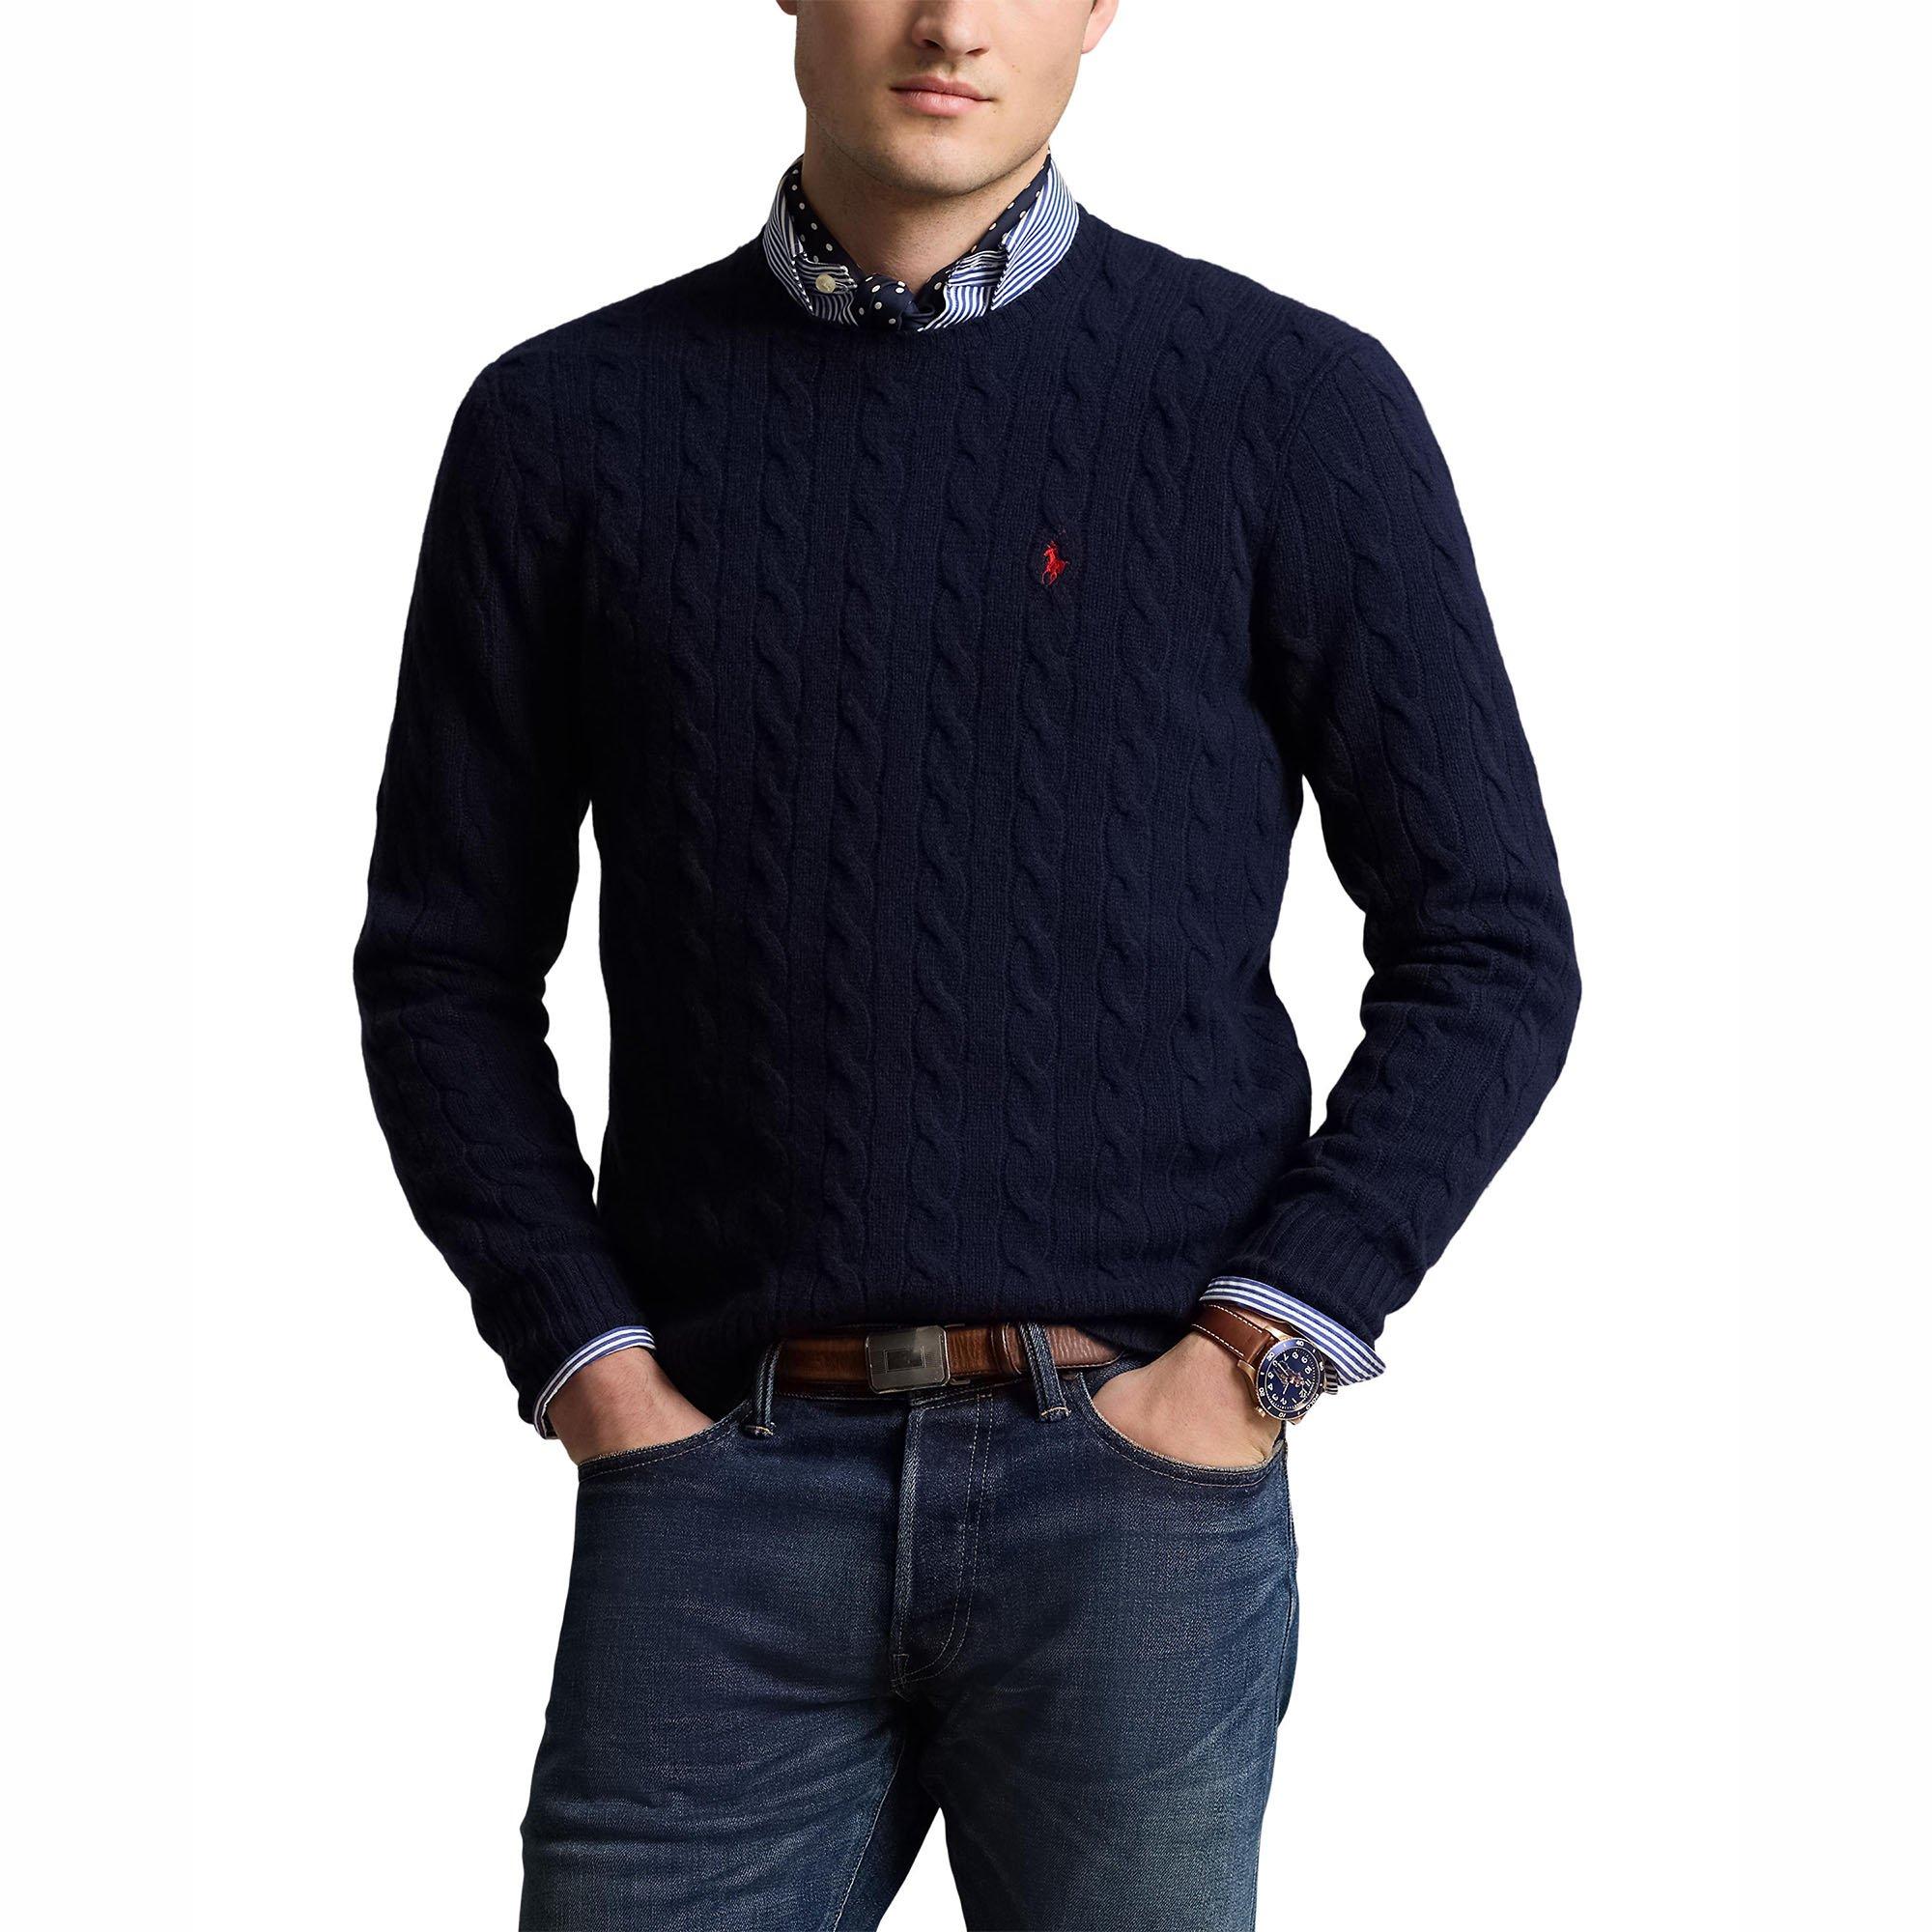 Men's Cable Knit Wool Cashmere Sweater